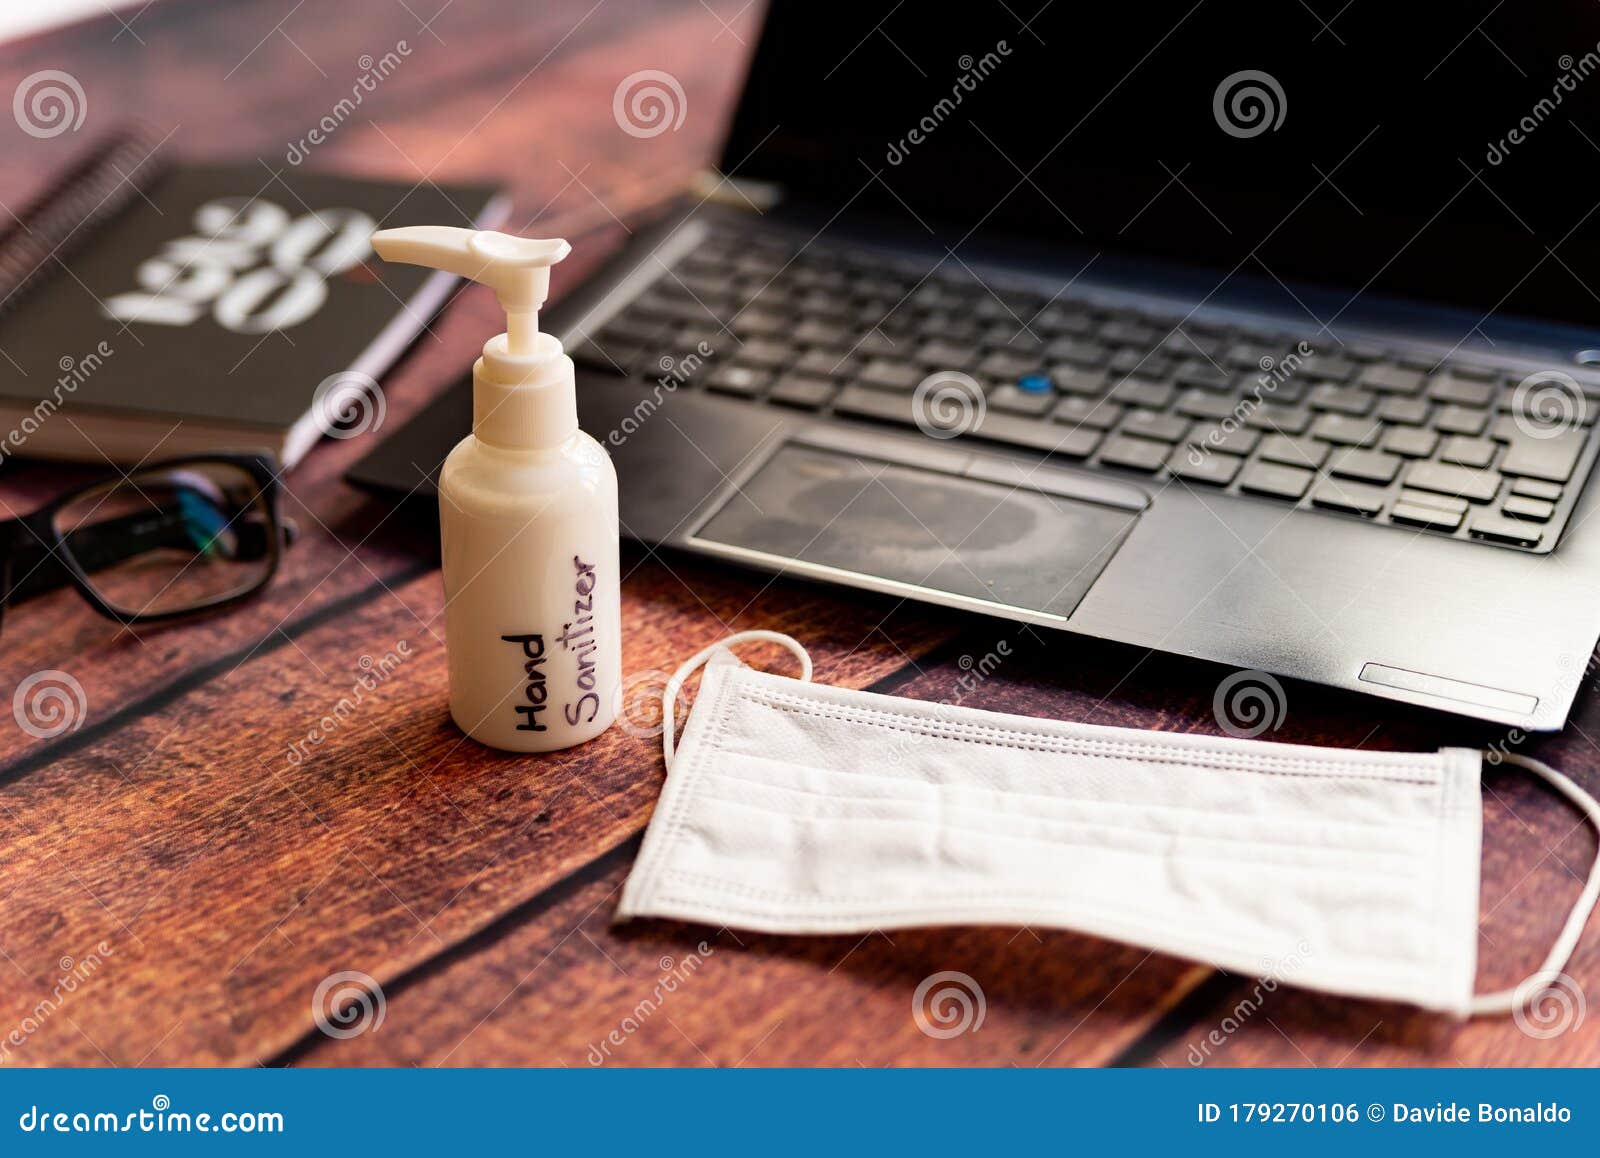 corona virus, work from home kit on wooden office desk with hand sanitizer and face mask, a solution against the outbreak of covid